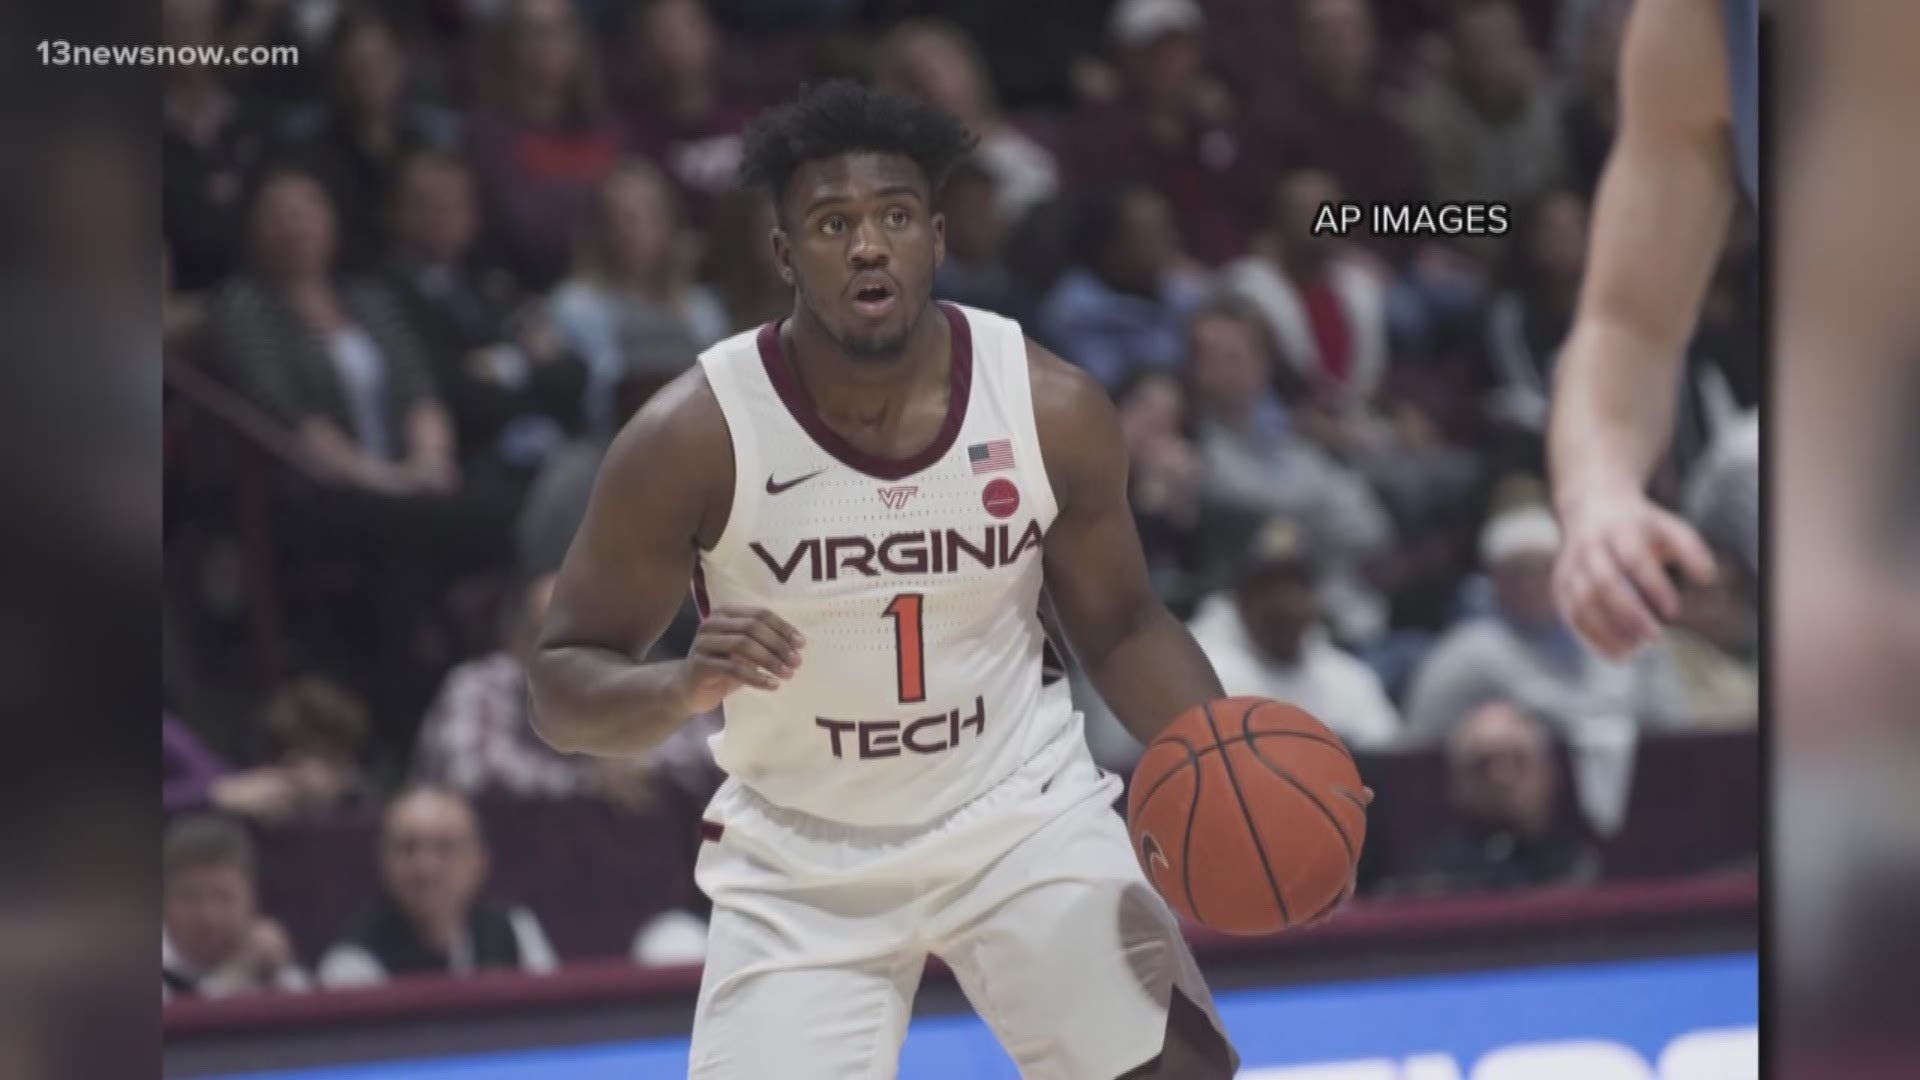 Isaiah Wilkins becomes the 2nd Virginia Tech player to transfer this month joining Landers Nolley who was on the All-ACC freshman team.